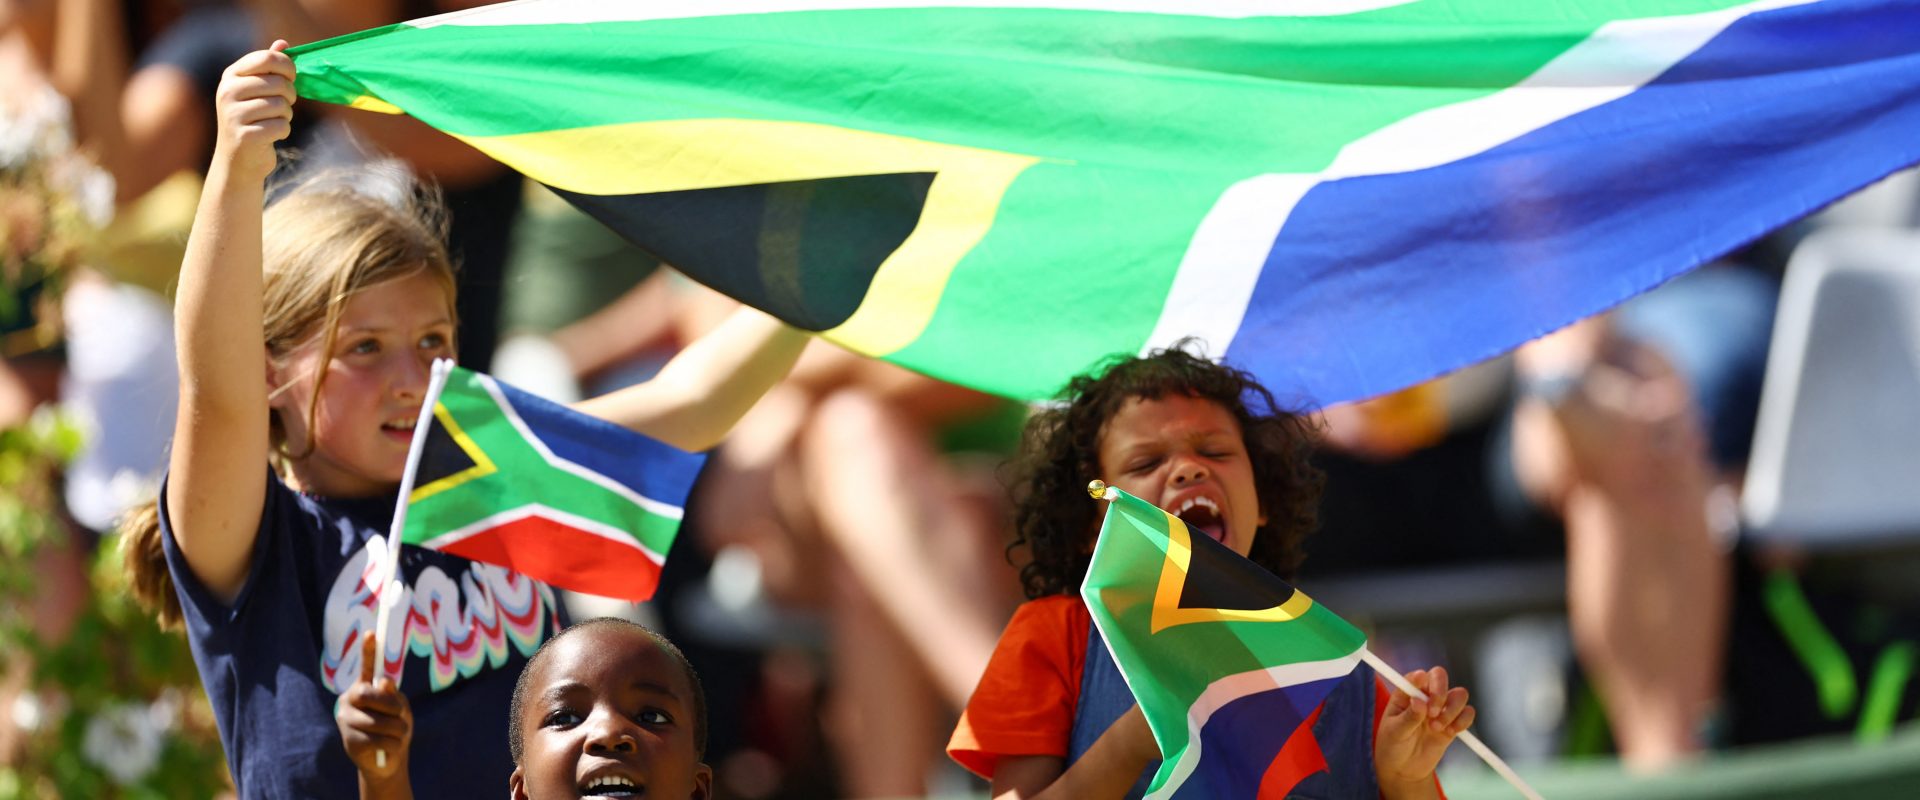 three children waving the South African flag